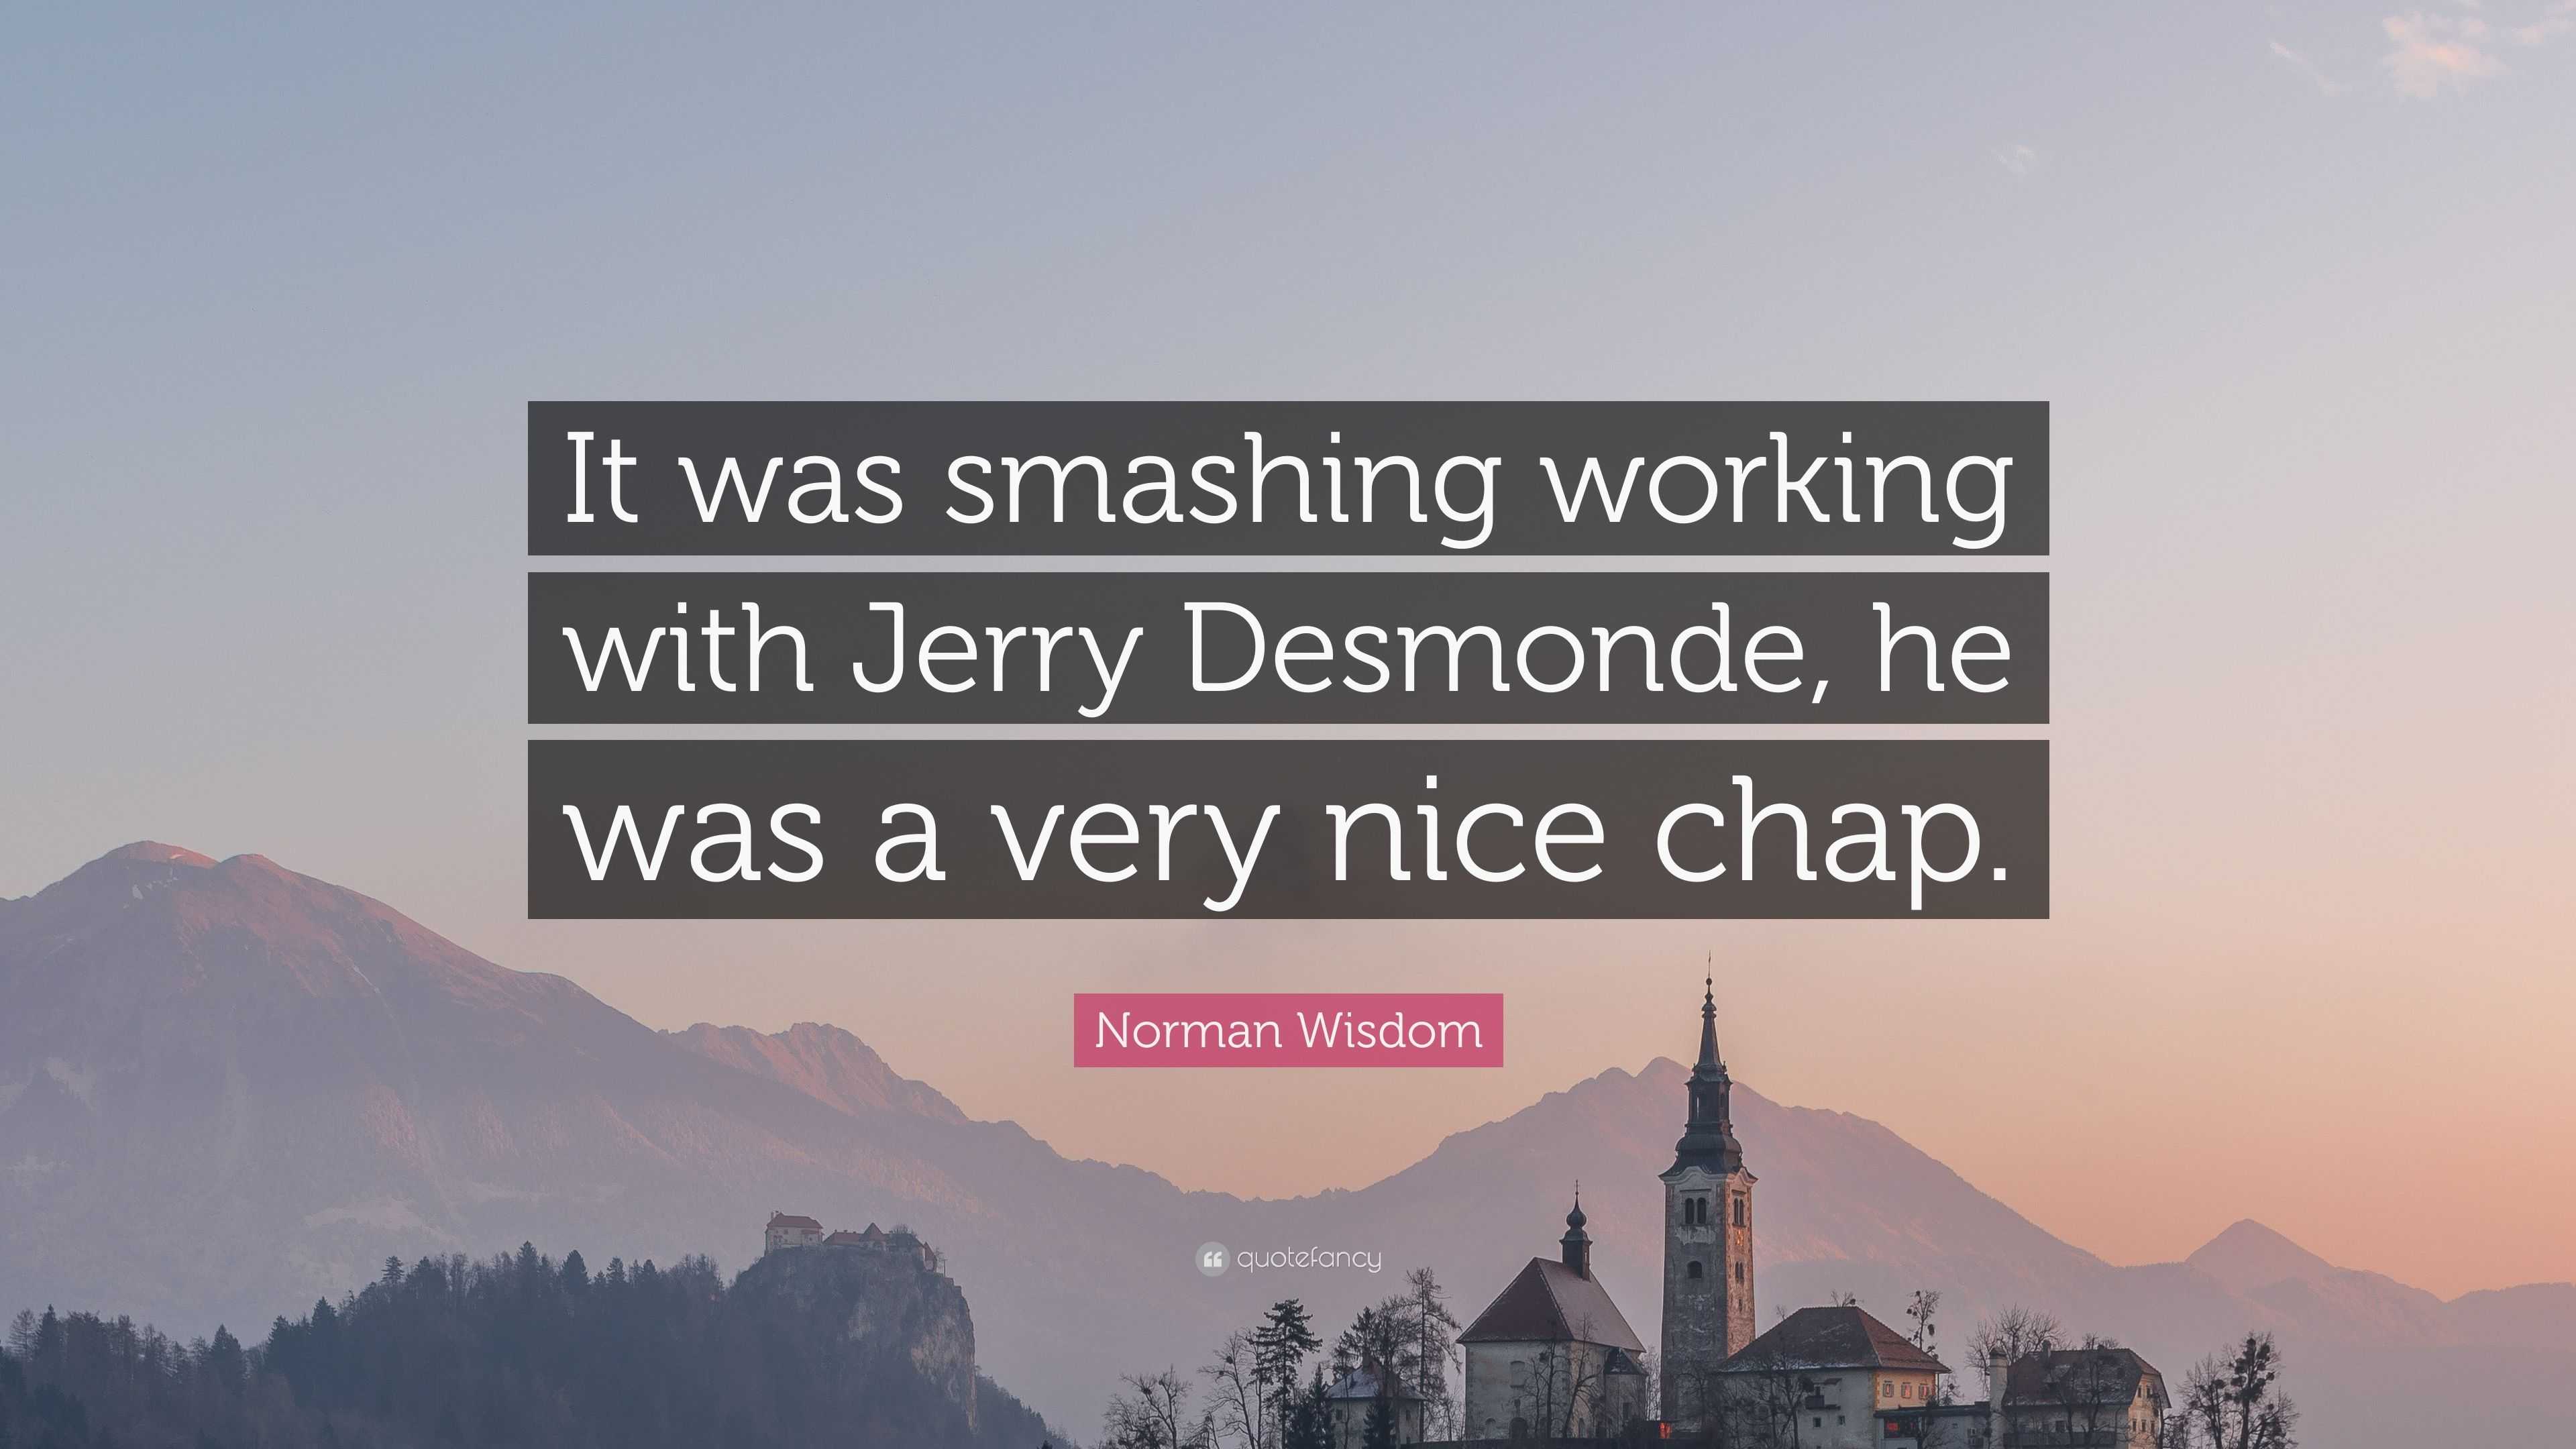 Norman Wisdom Quote: "It was smashing working with Jerry ...